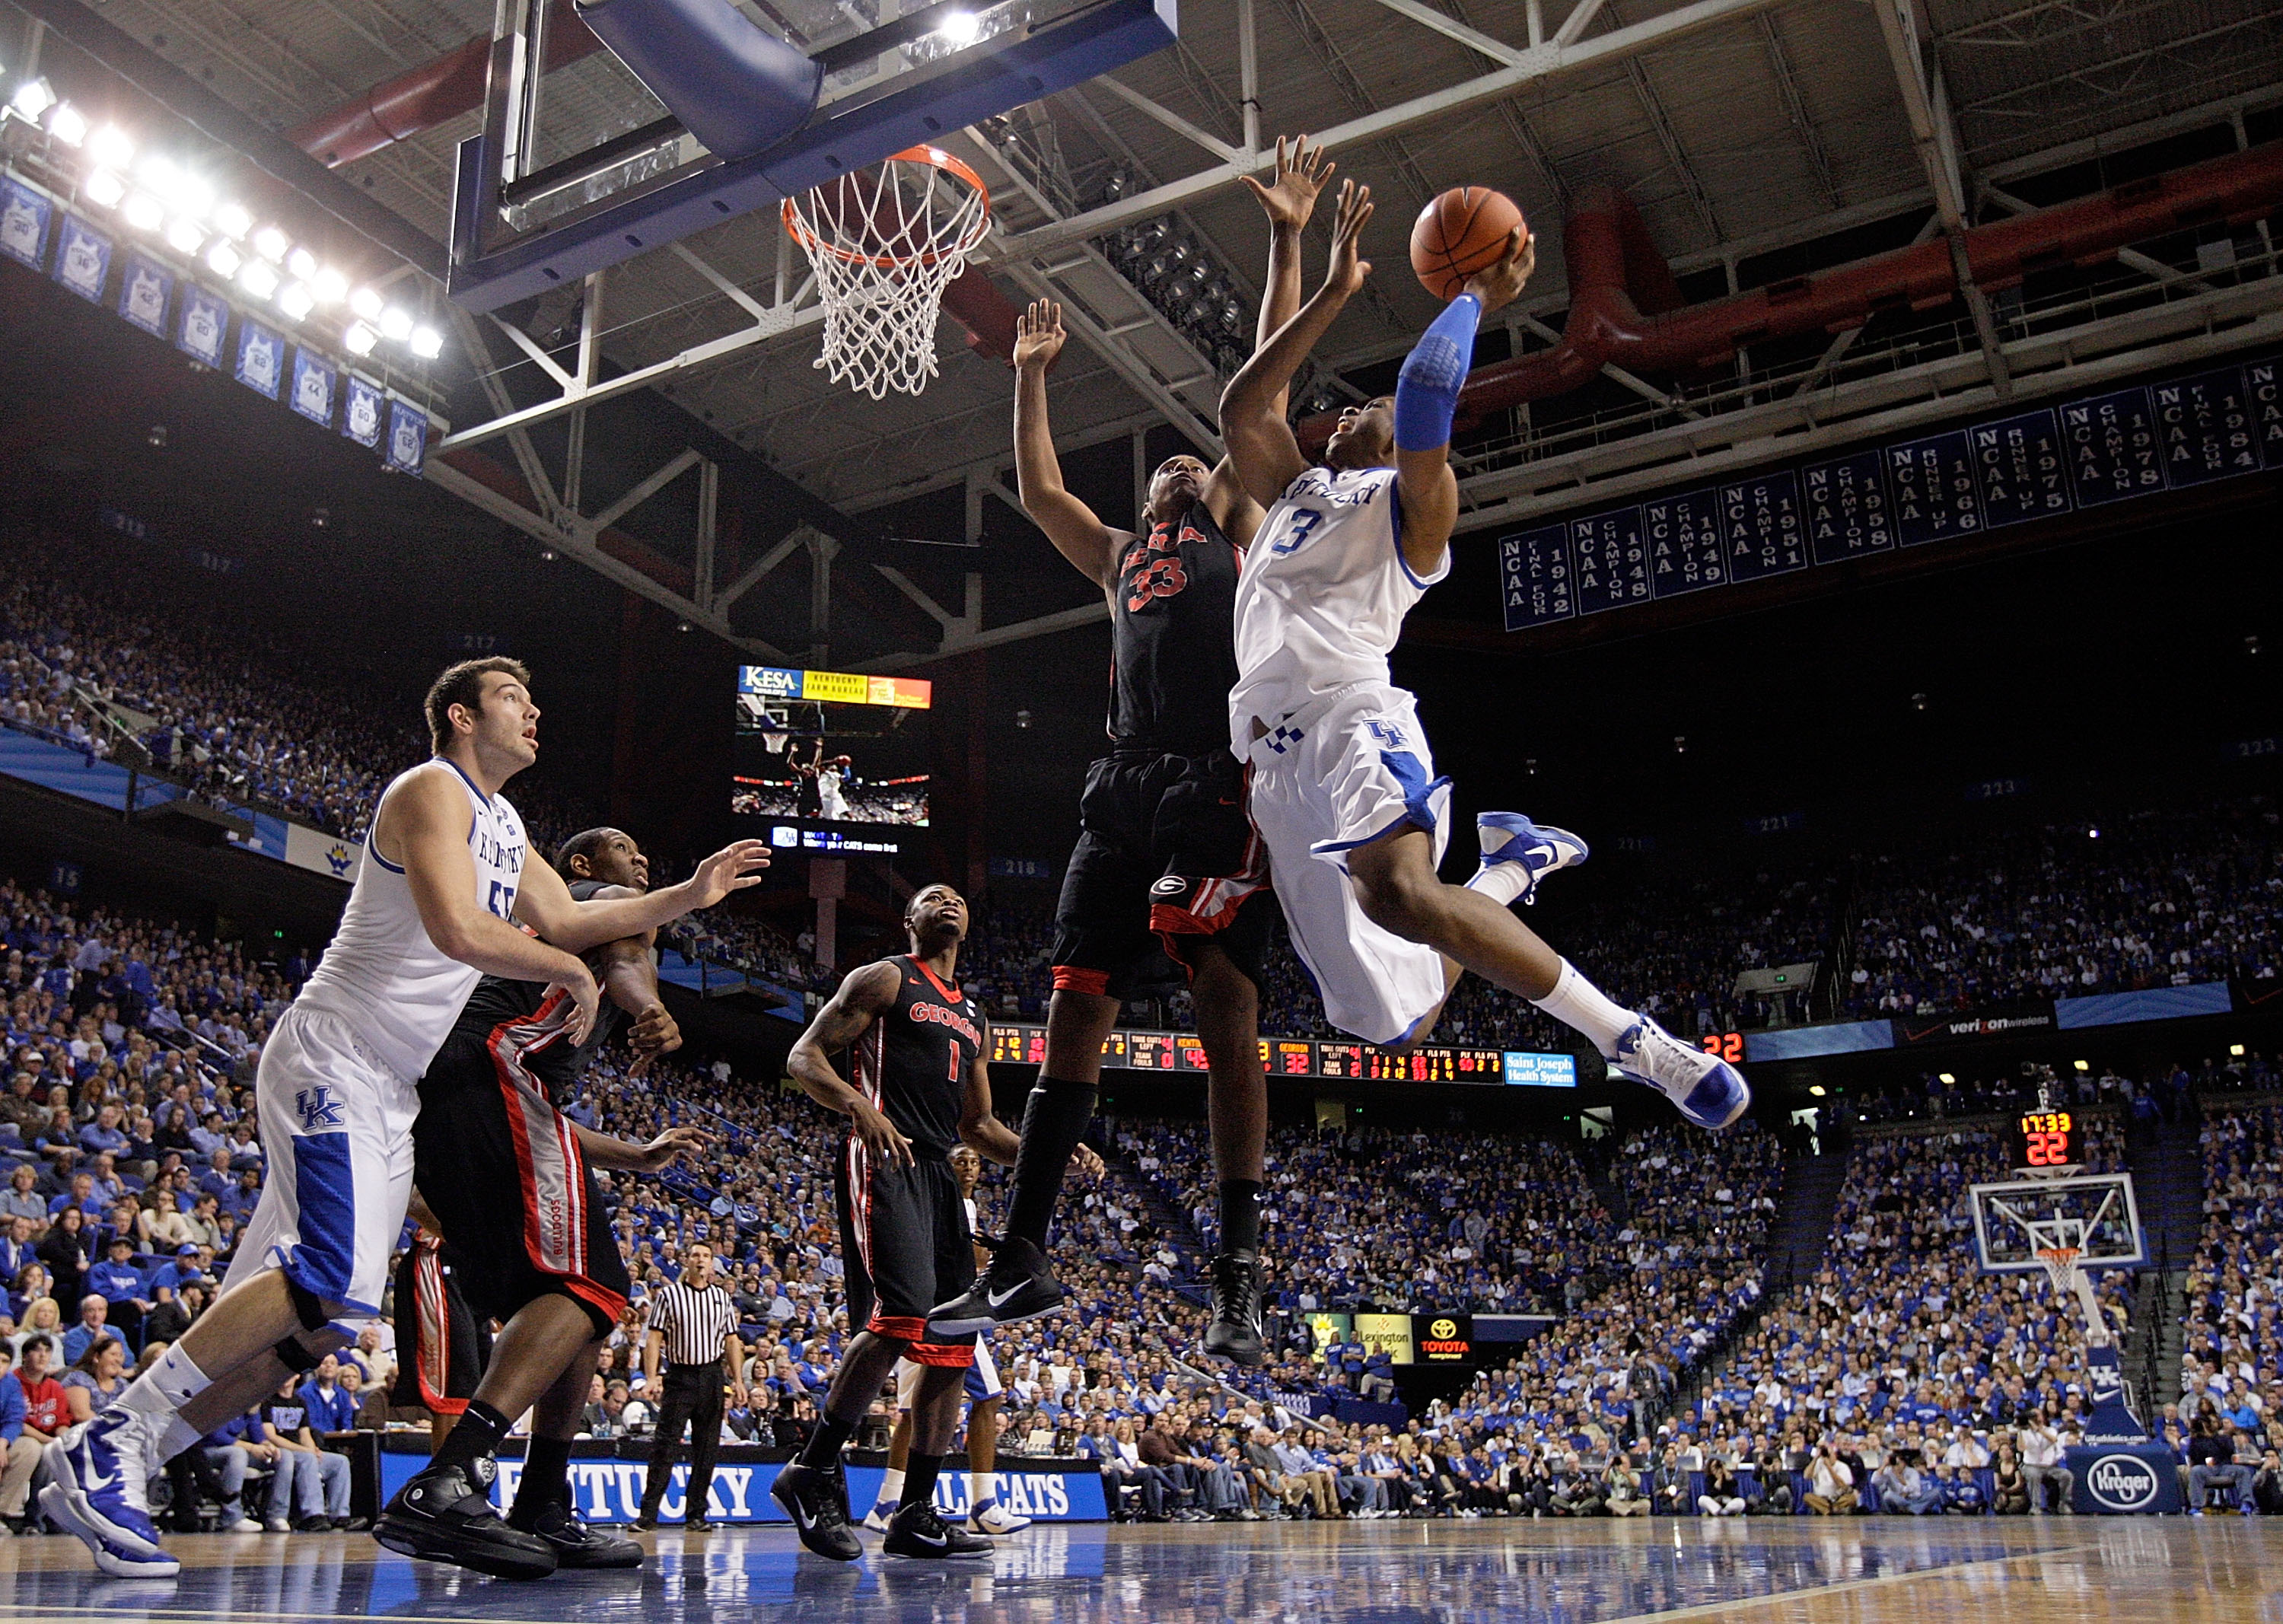 LEXINGTON, KY - JANUARY 29:  Terrence Jones #3 of the Kentucky Wildcats shoots the ball while defended by Trey Thompkins #33 of the Georgia Bulldogs during the SEC game at Rupp Arena on January 29, 2011 in Lexington, Kentucky. Kentucky won 66-60.  (Photo